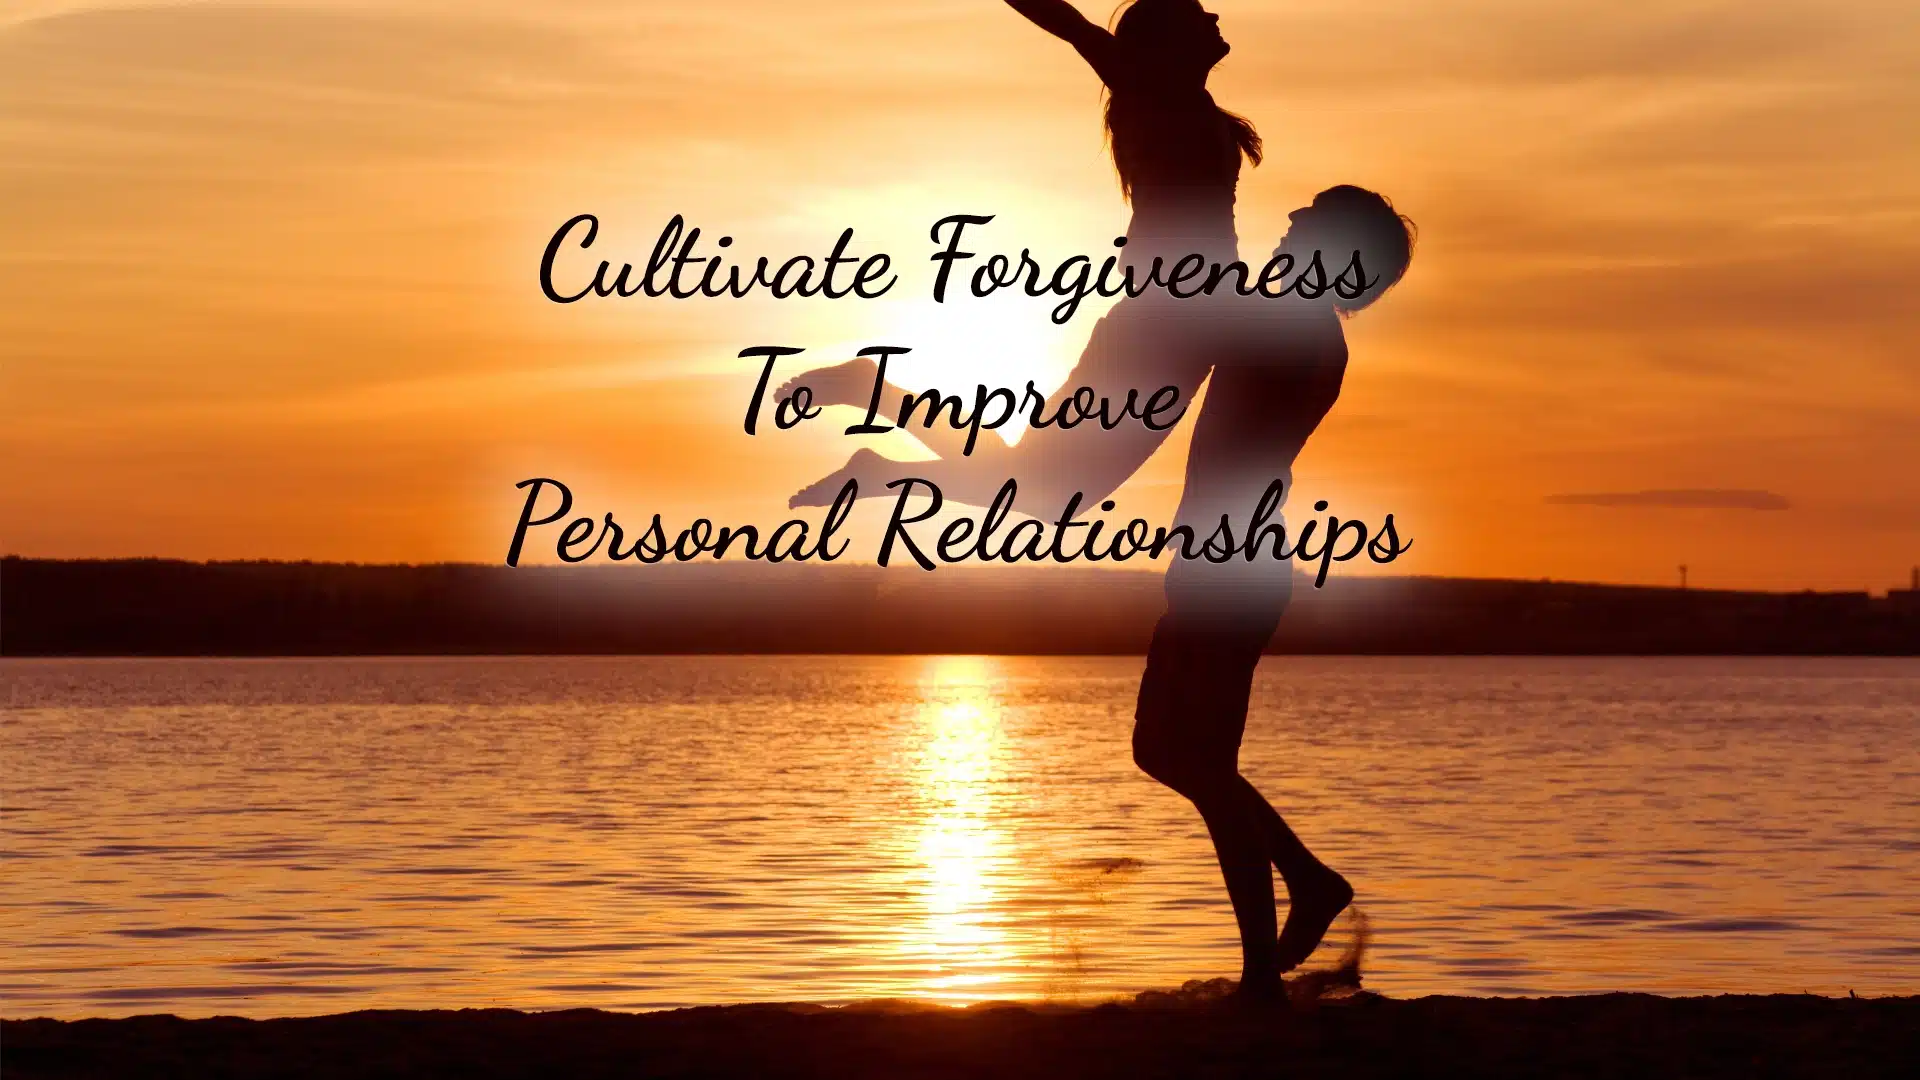 Cultivate Forgiveness To Improve Personal Relationships